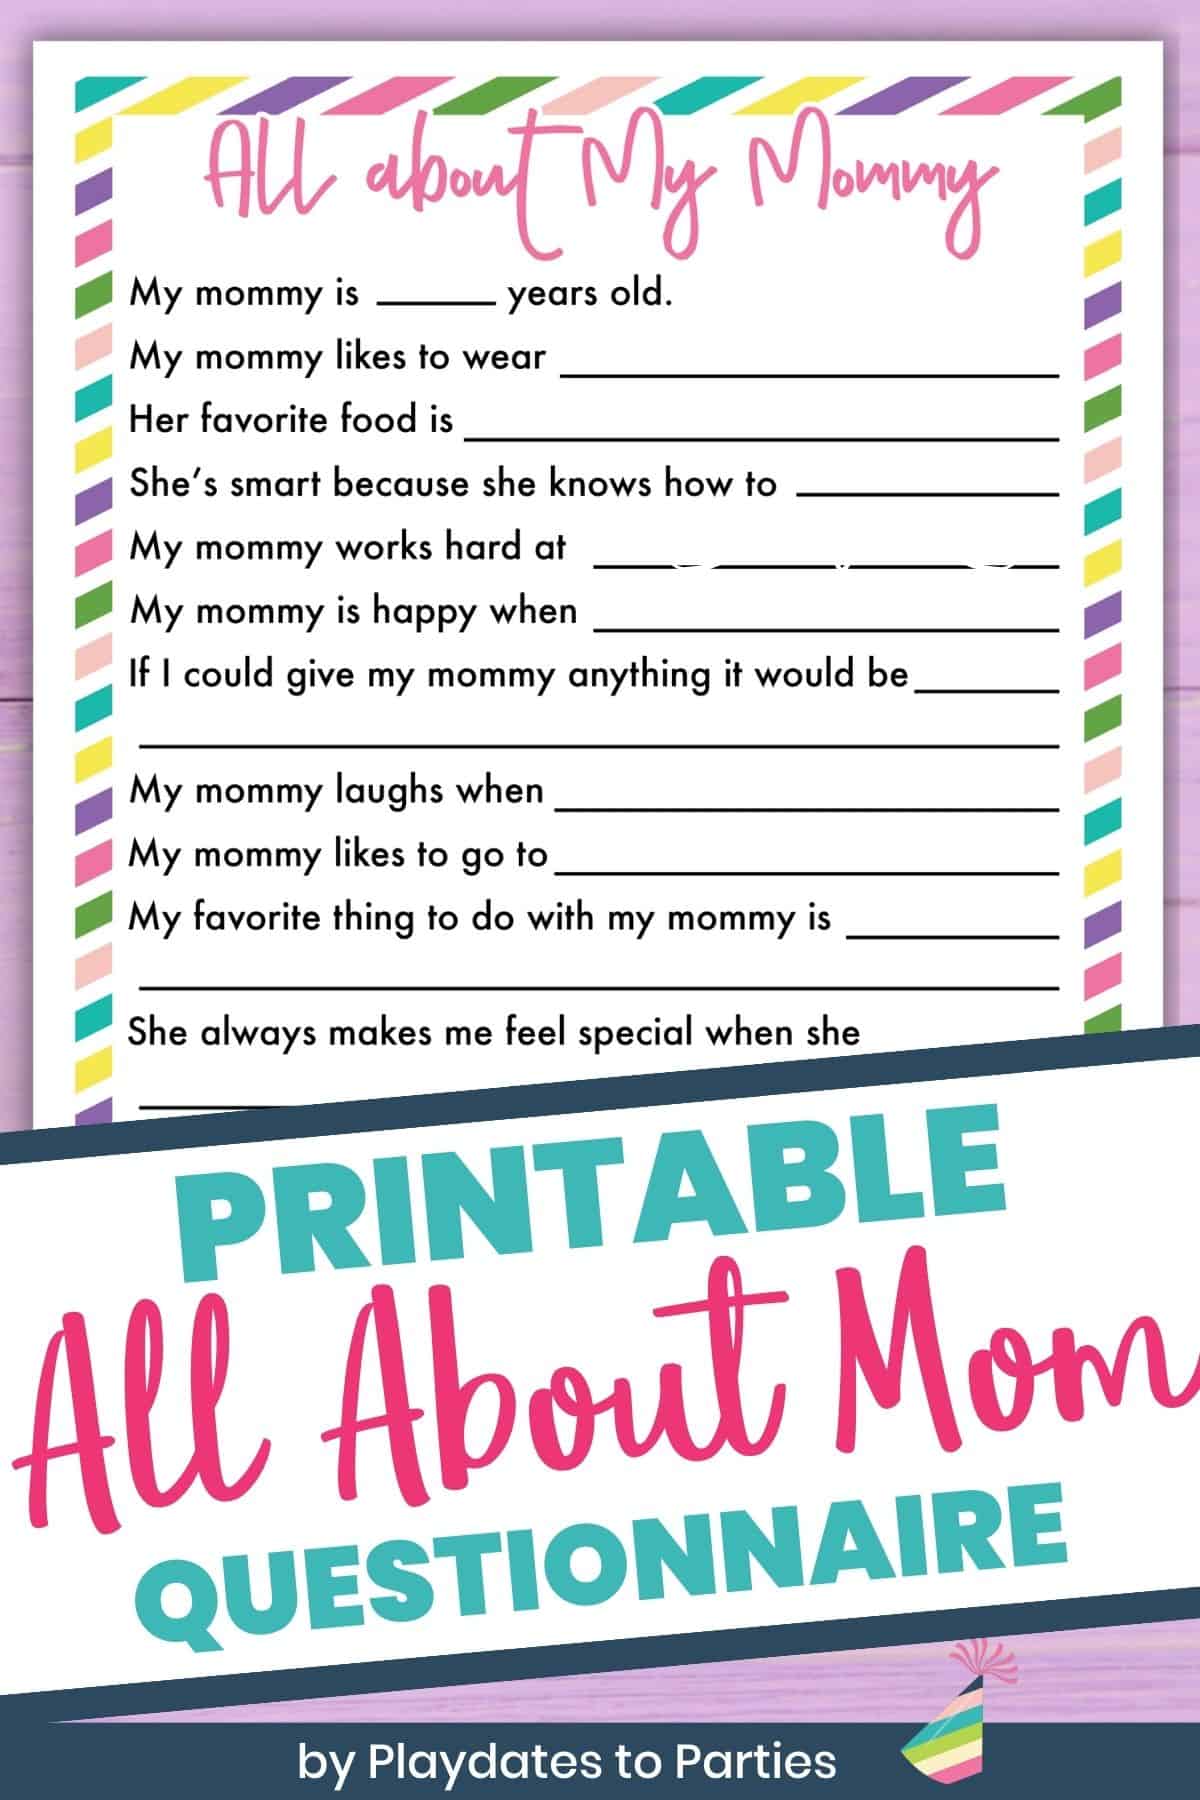 Printable Mother's Day Questionnaire Pin Image